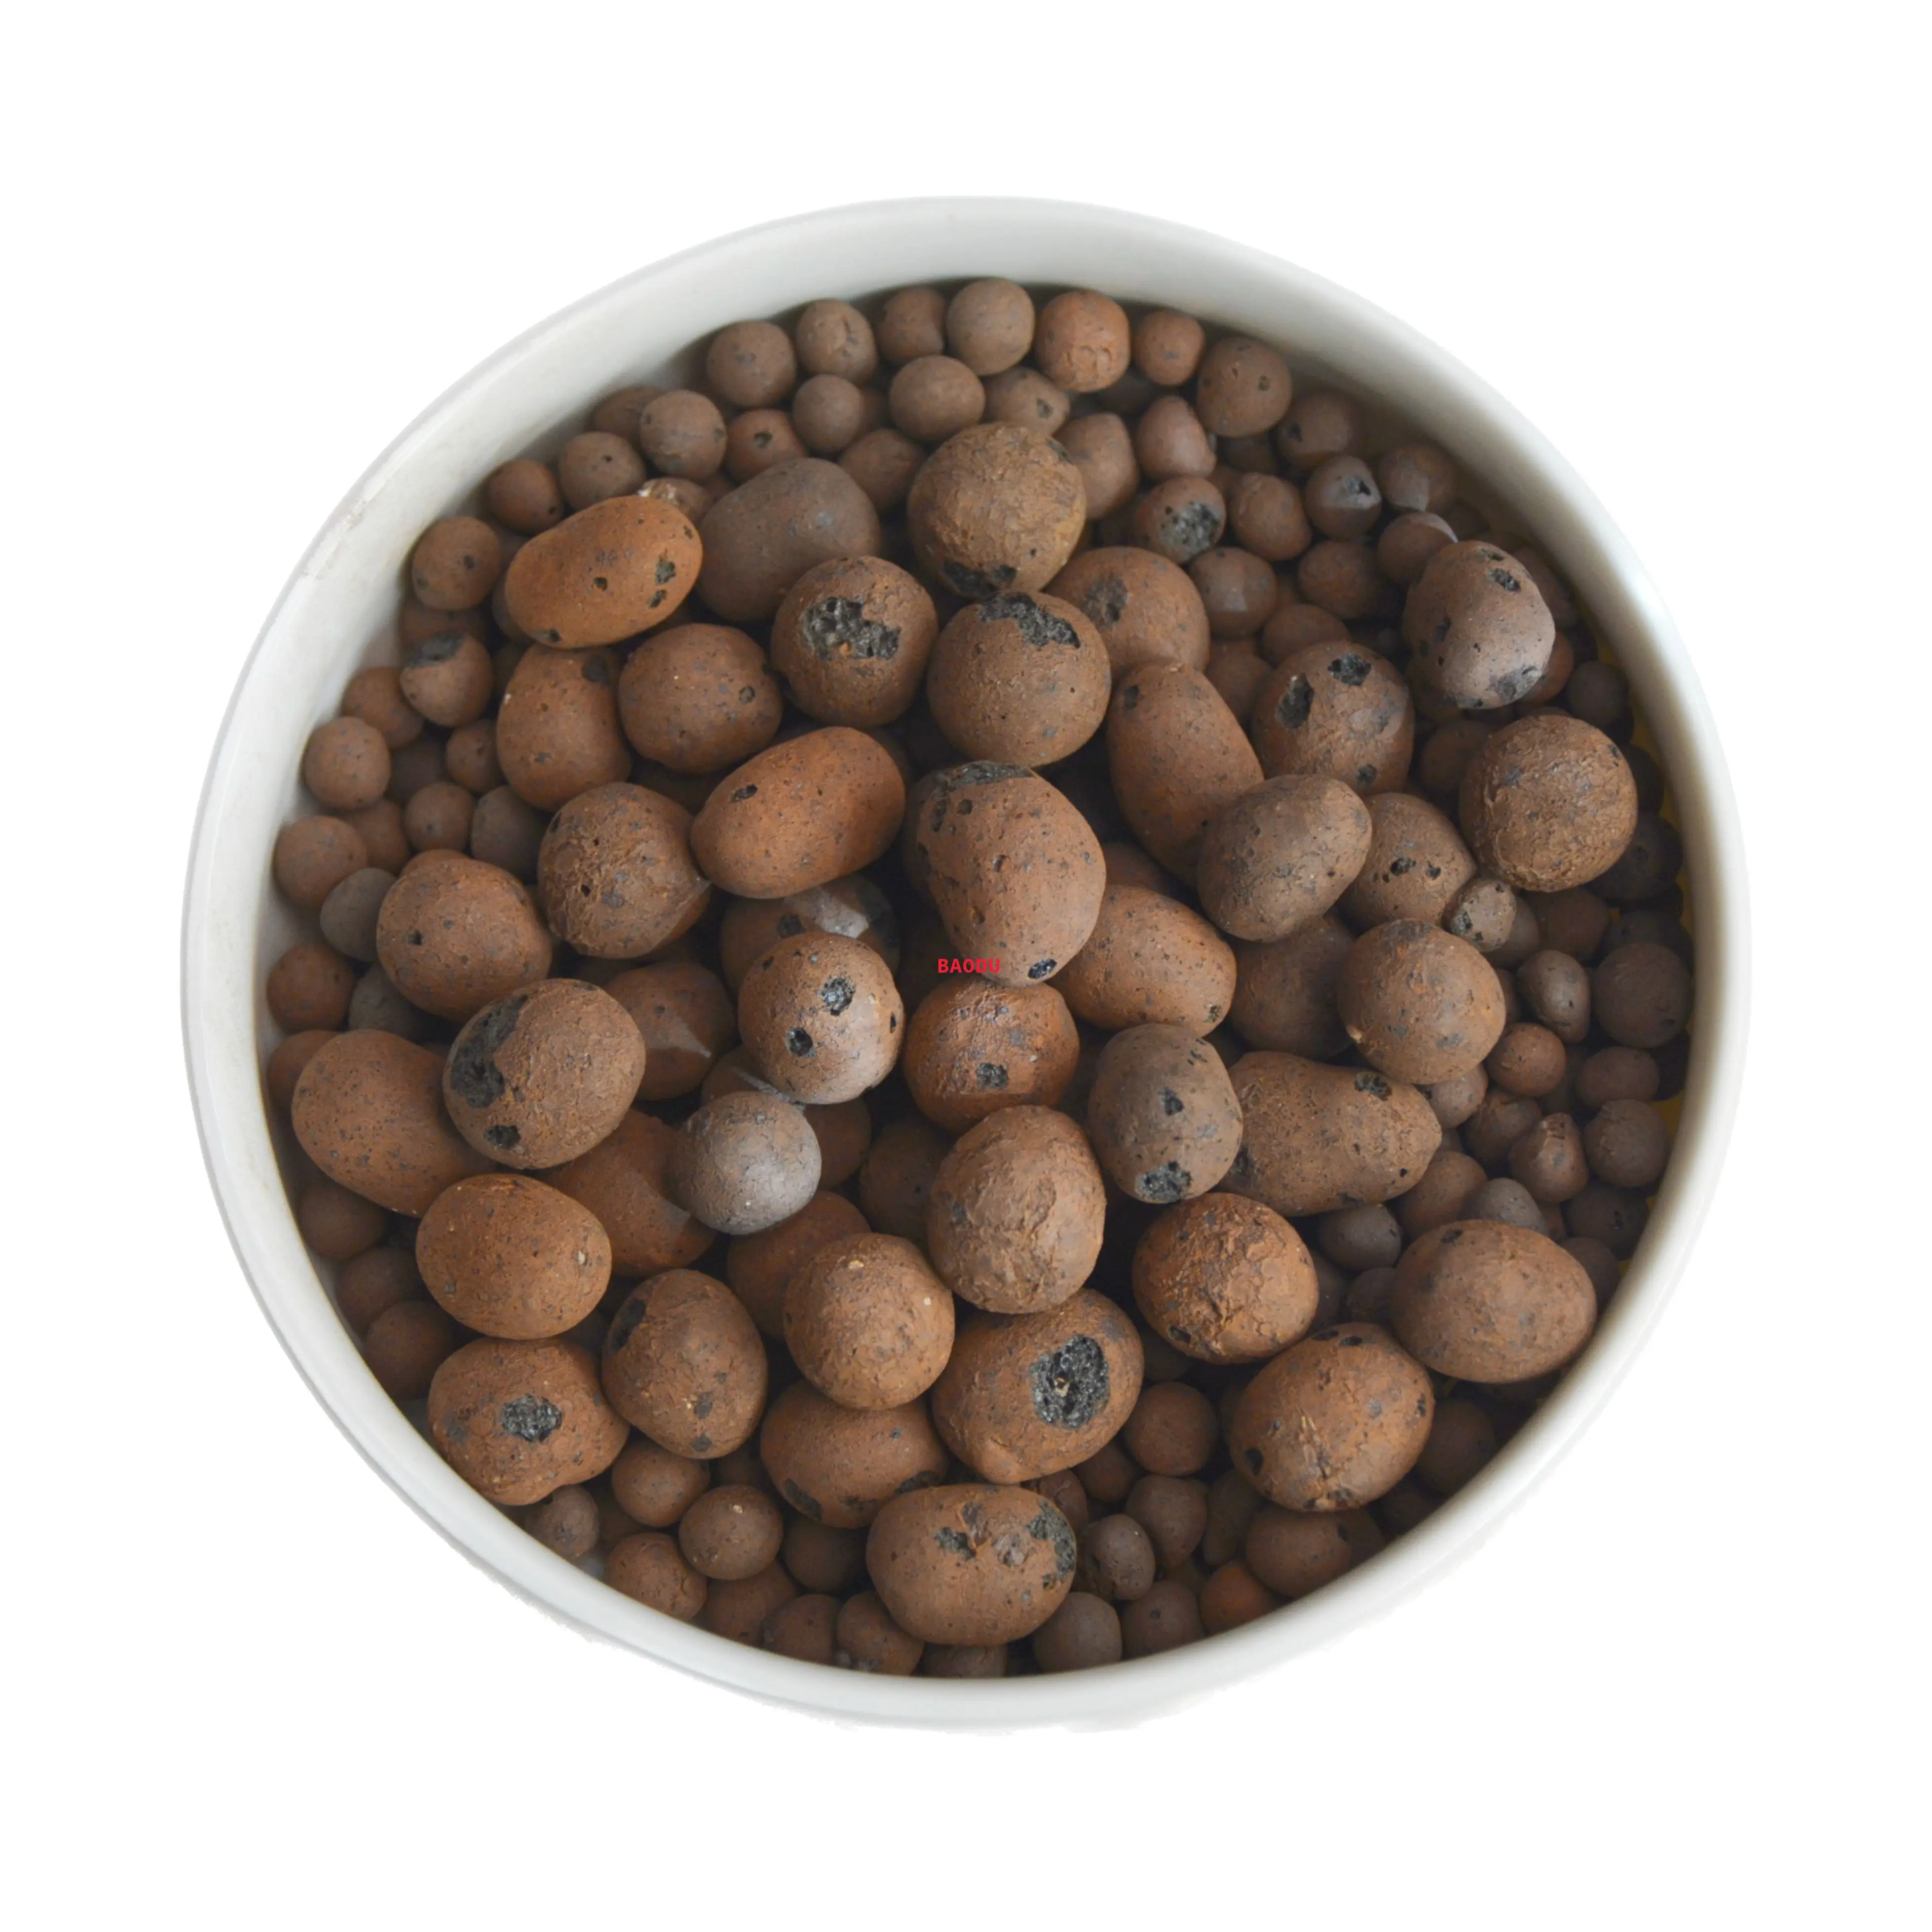 Buy Leca Clay Balls (250gms) - Rs.49/- sale online India